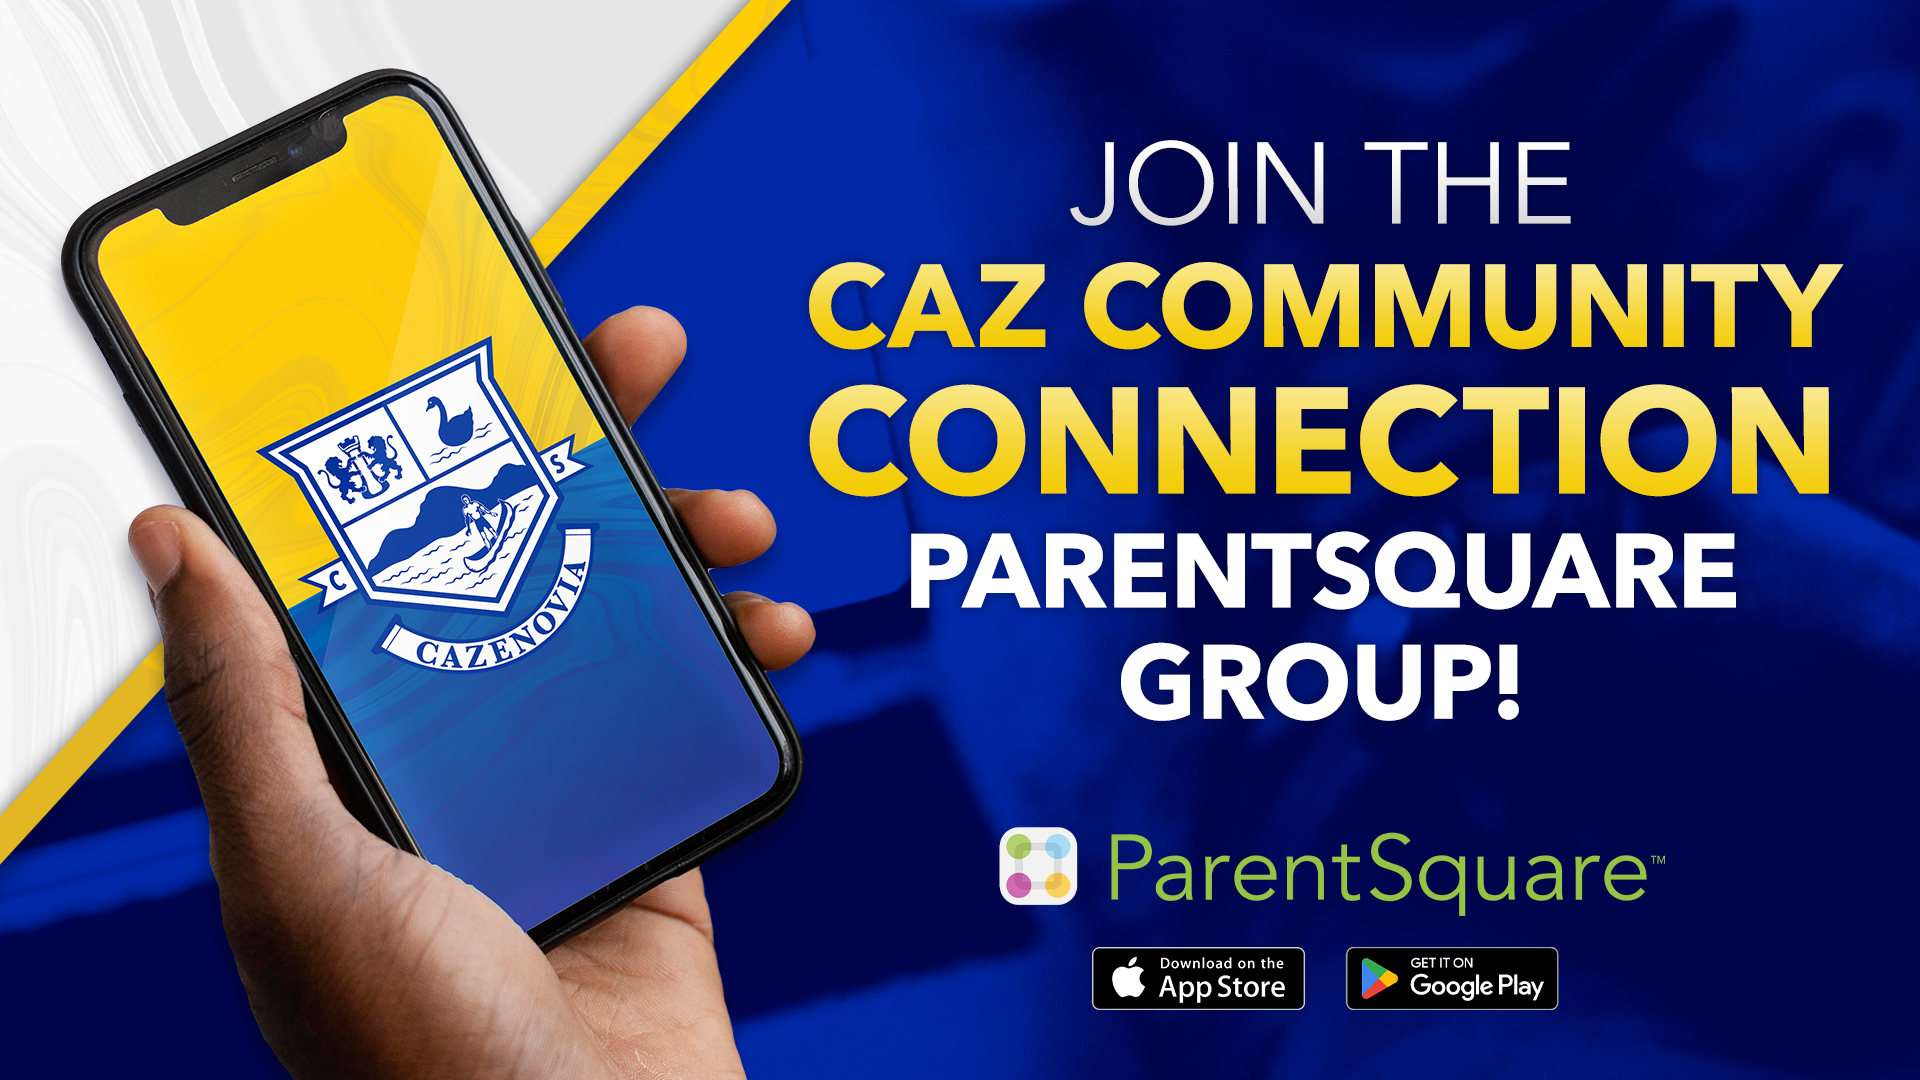 Join the new Caz Community ParentSquare Group